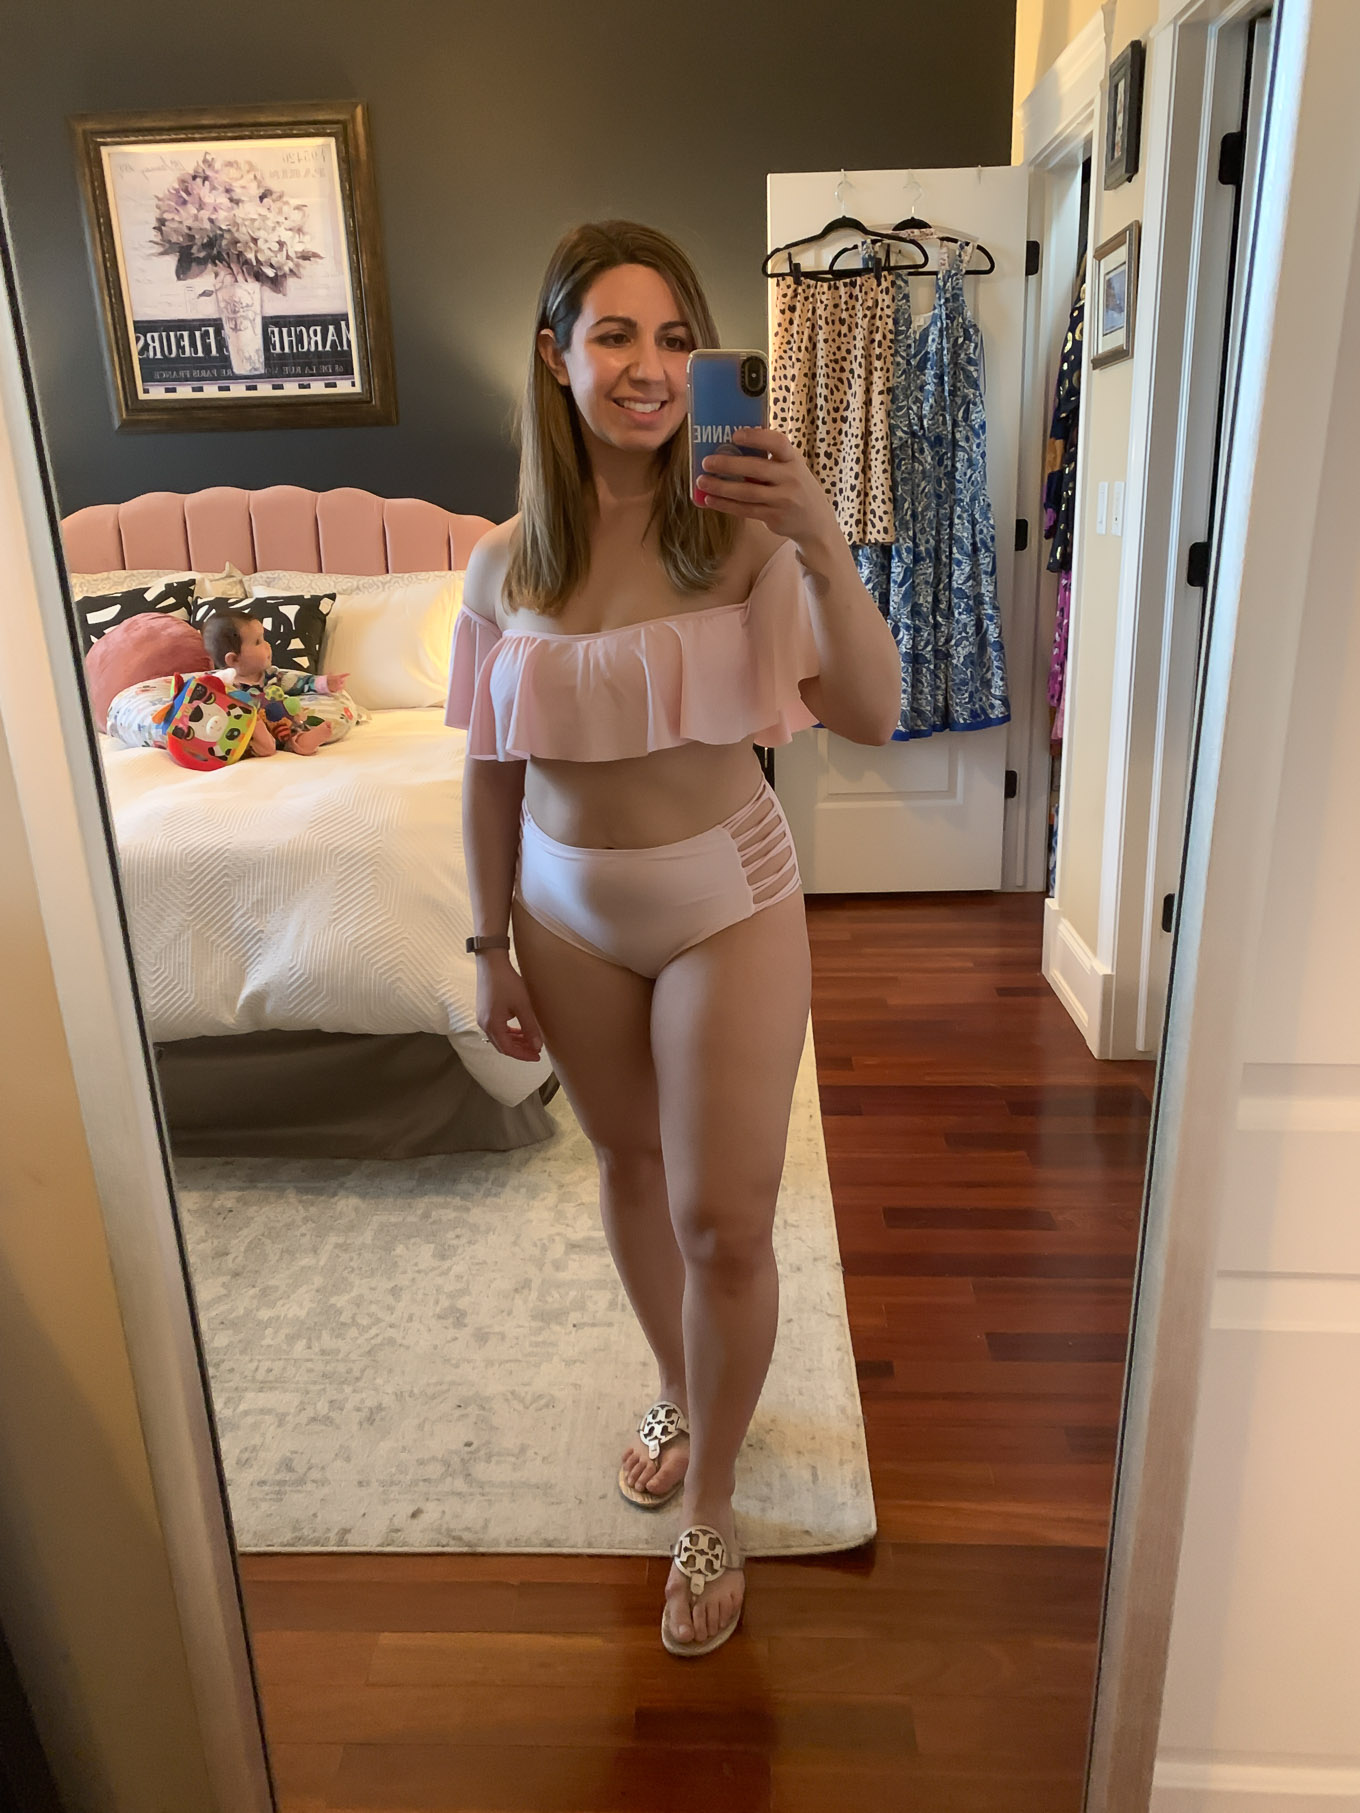 At Home Swimwear Try On by popular Chicago fashion blog, Glass of Glam: image of a woman standing in her master bedroom and wearing a Amazon Lukitty Women's Off Shoulder Ruffles Bikini Set.